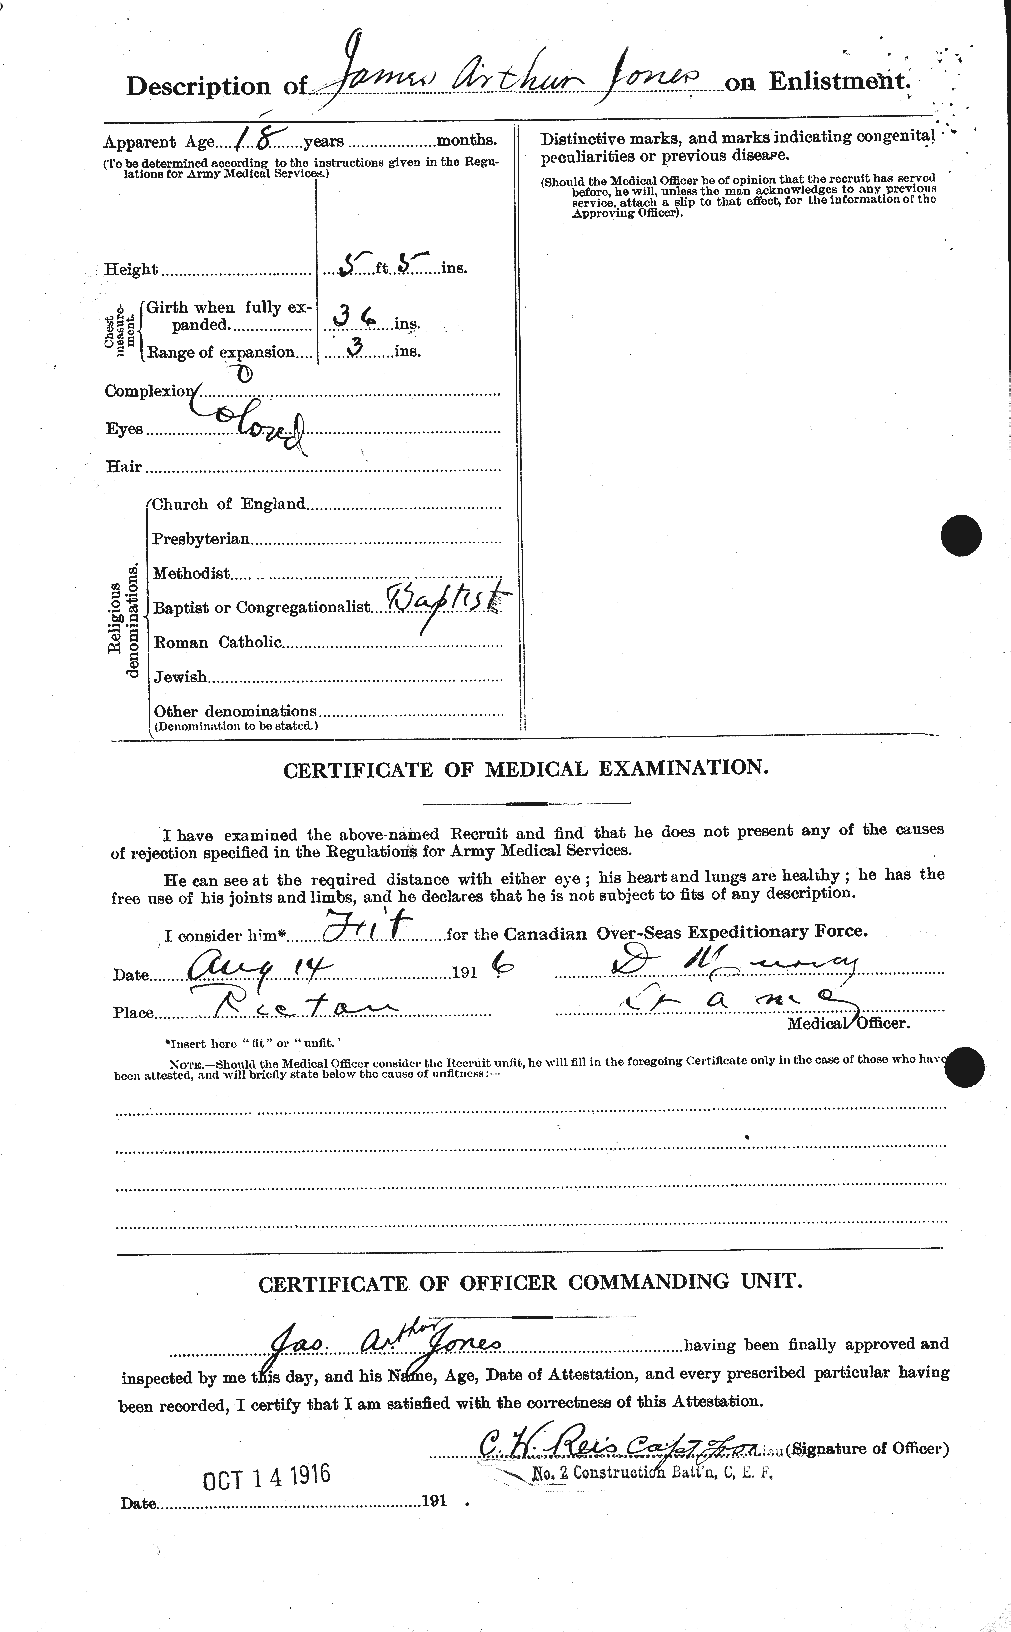 Personnel Records of the First World War - CEF 427394b